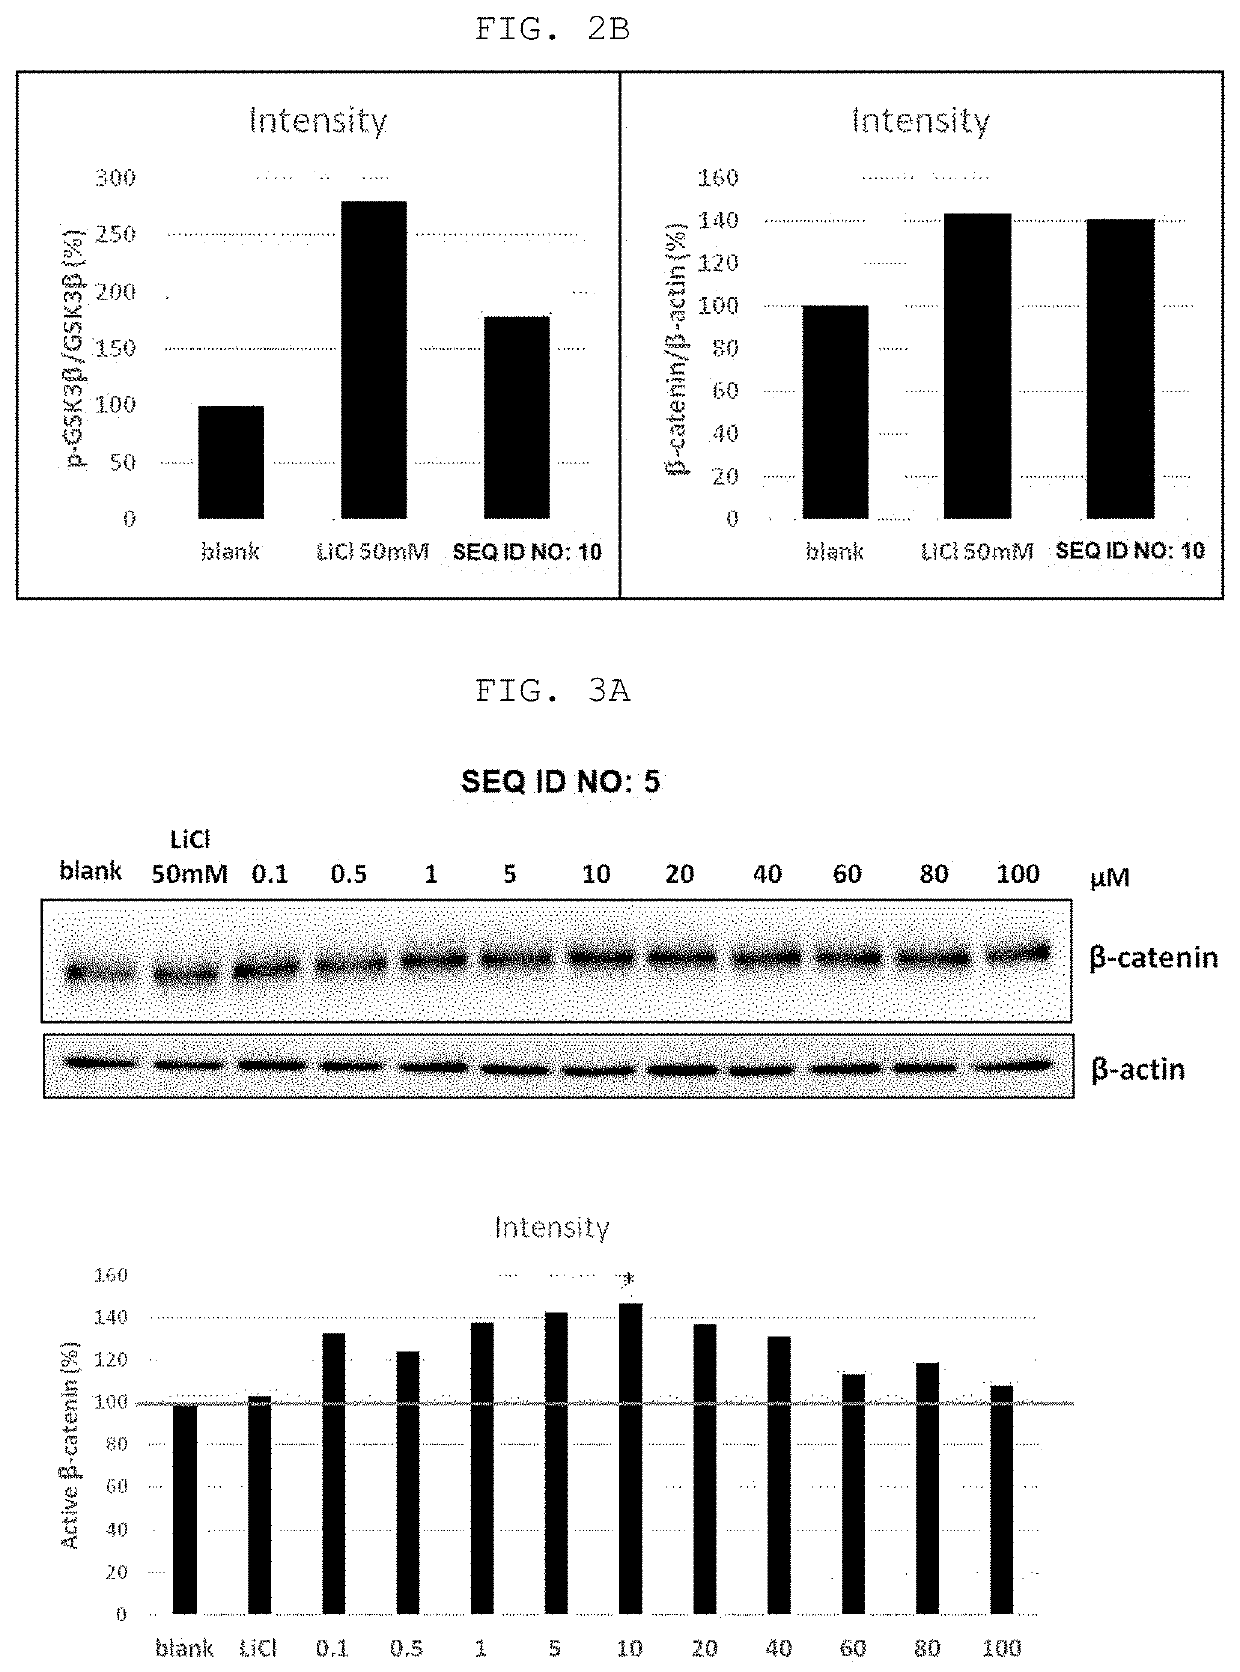 Peptide for reducing hair loss and promoting hair growth, and cosmetic composition and pharmaceutical composition comprising same